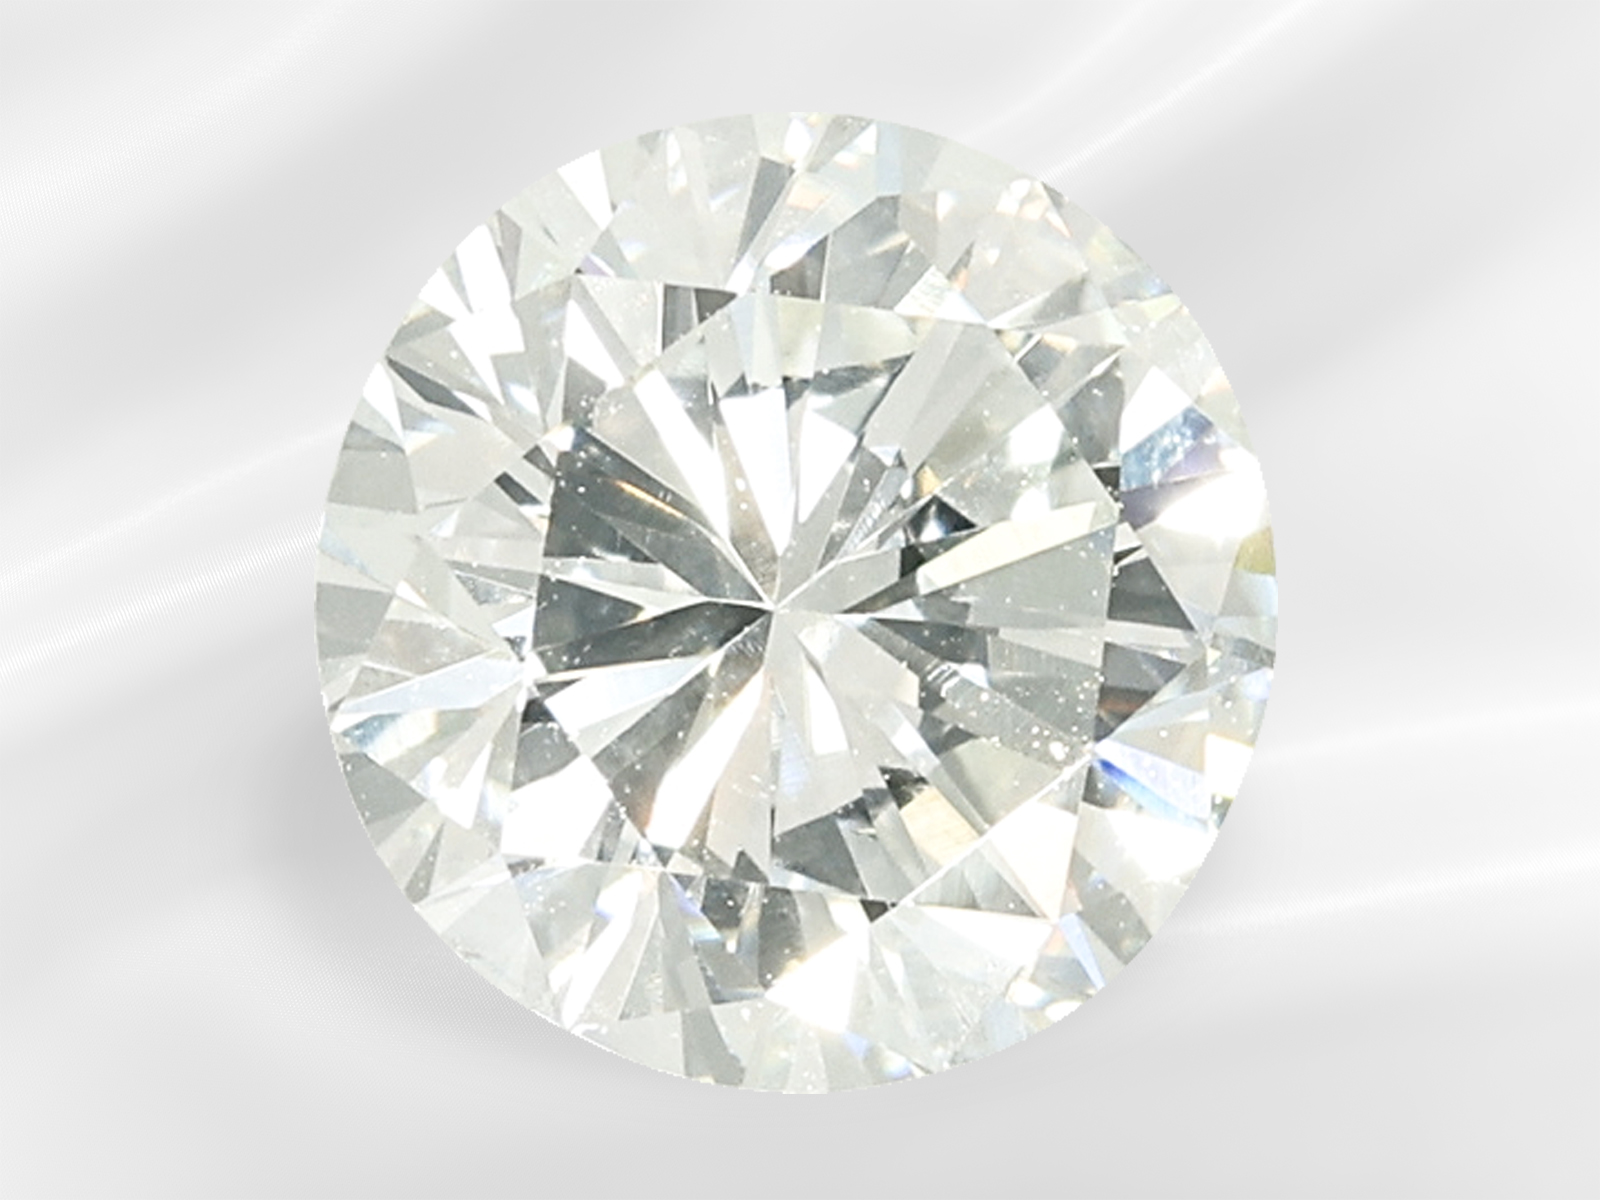 Extremely fine brilliant-cut diamond in top quality, Top Wesselton/VVS1 1.16ct, DPL Expertise - Image 2 of 3